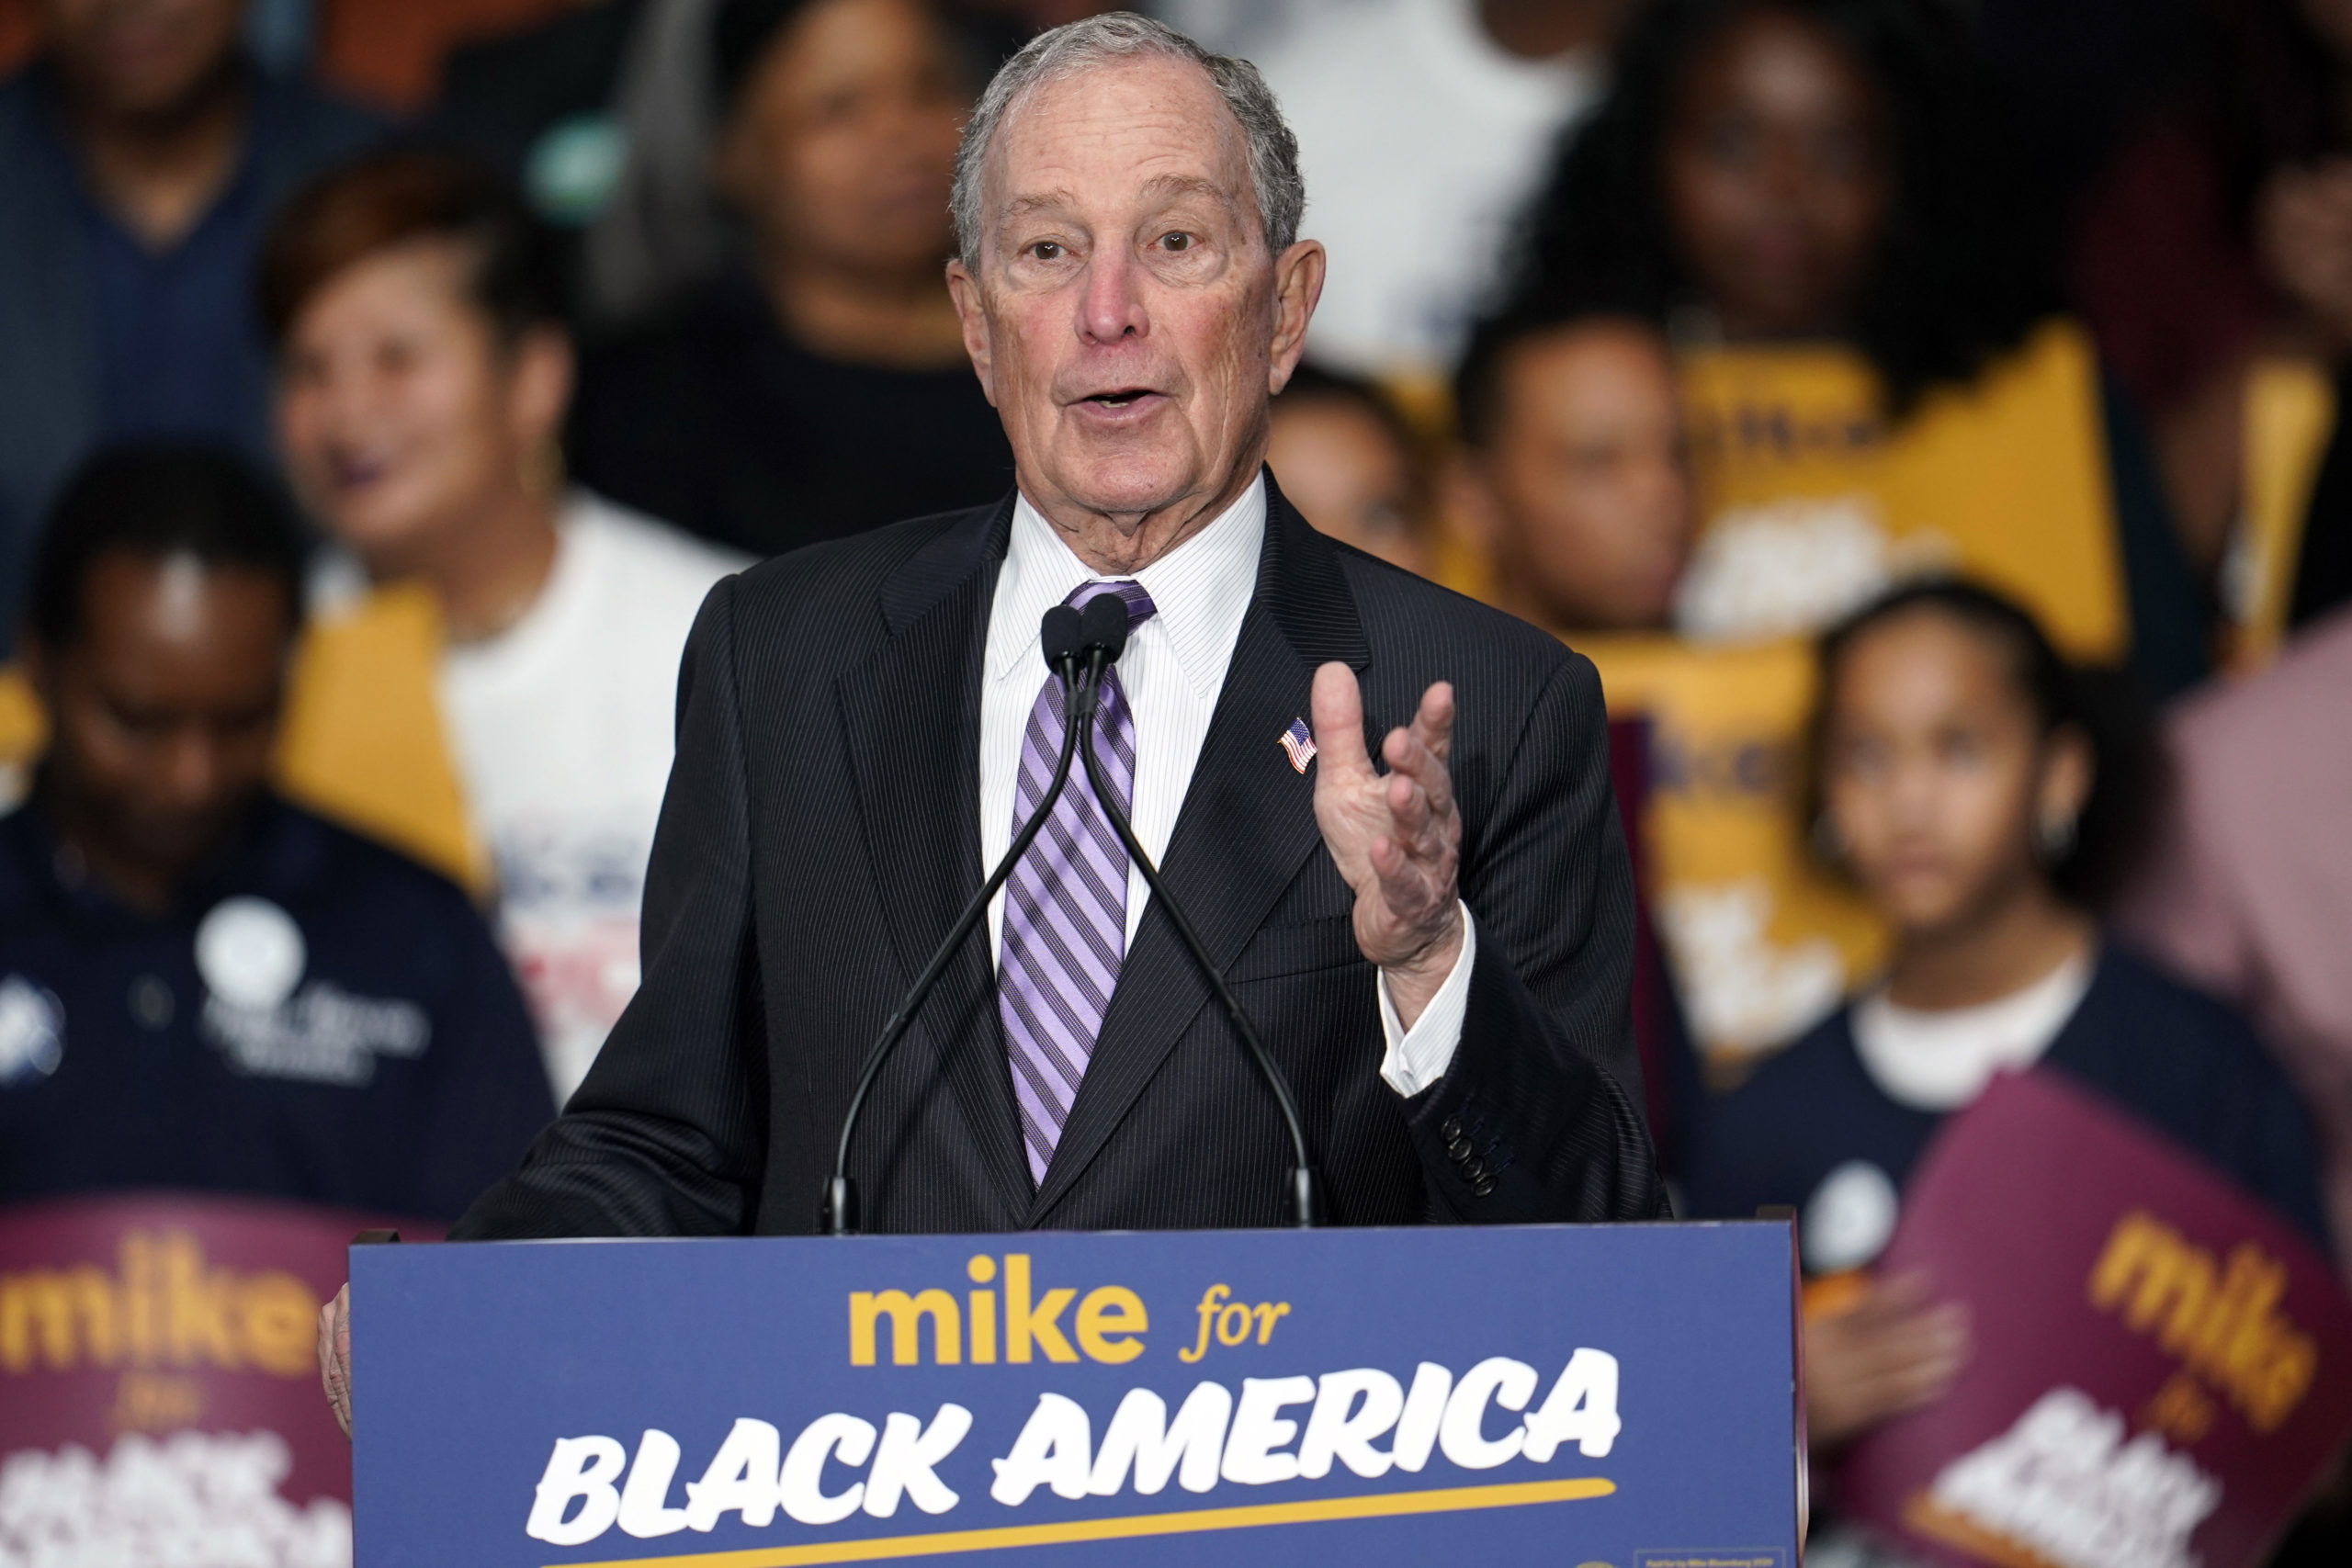 Former New York City Mayor Michael Bloomberg speaks at the Buffalo Soldiers National Museum in Houston, Tx.